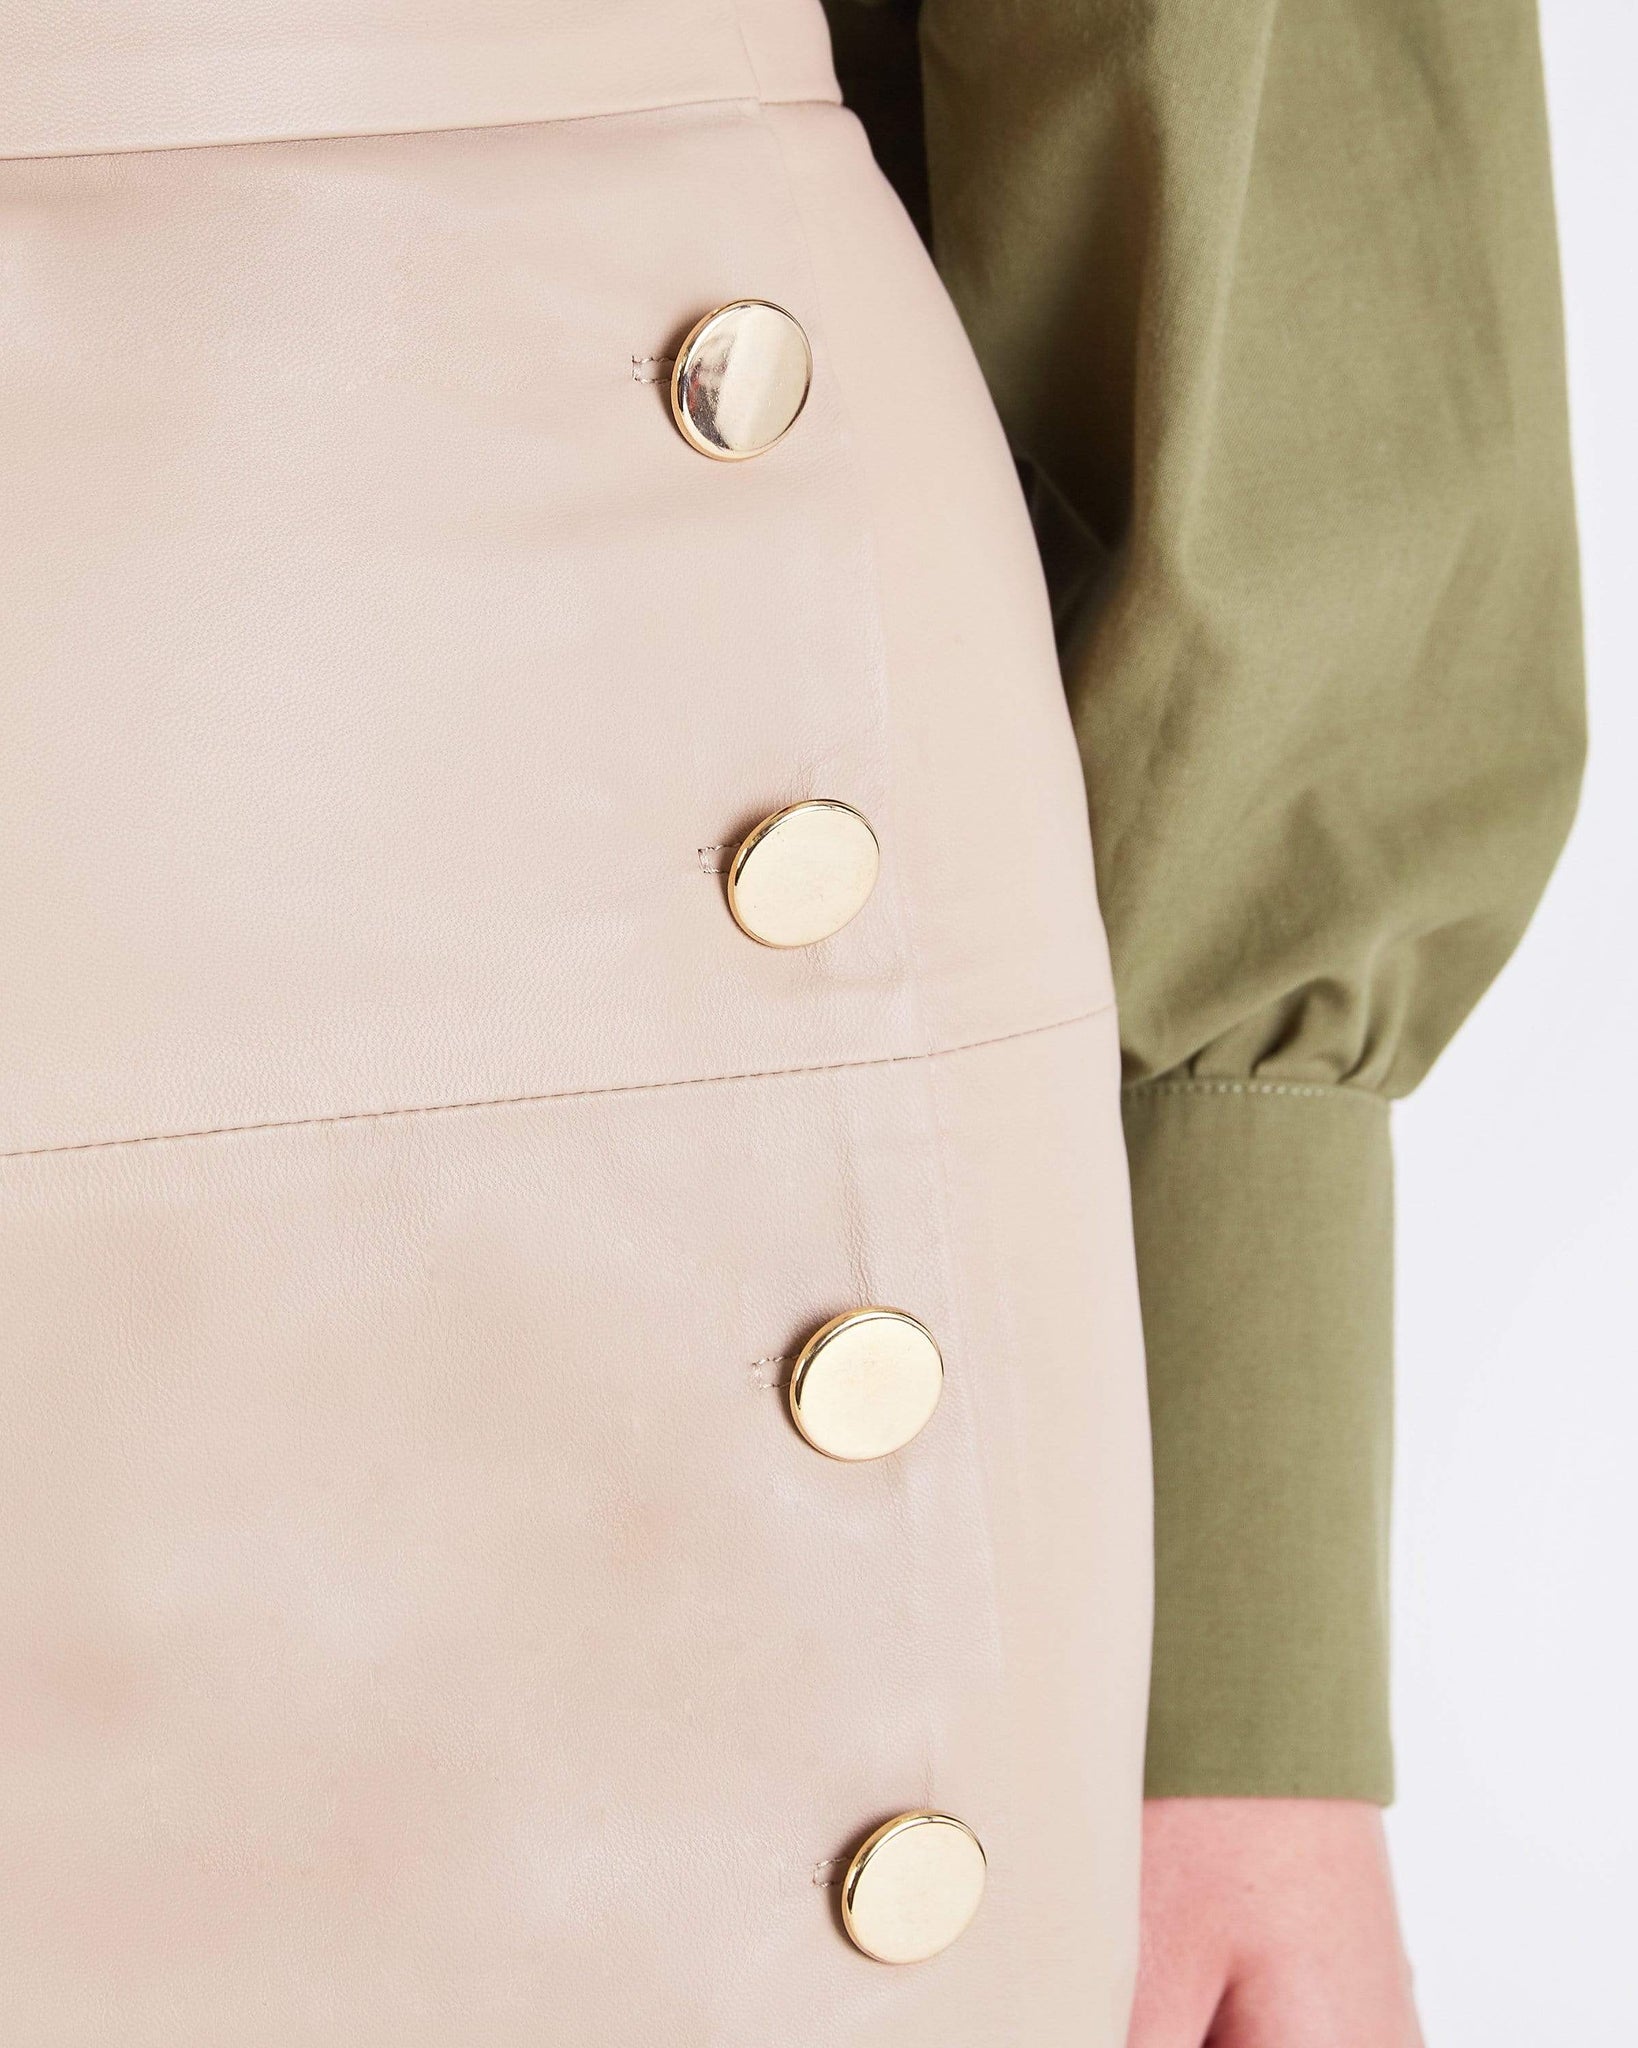 Lucy BUTTON FRONT LEATHER SKIRT - BEIGE